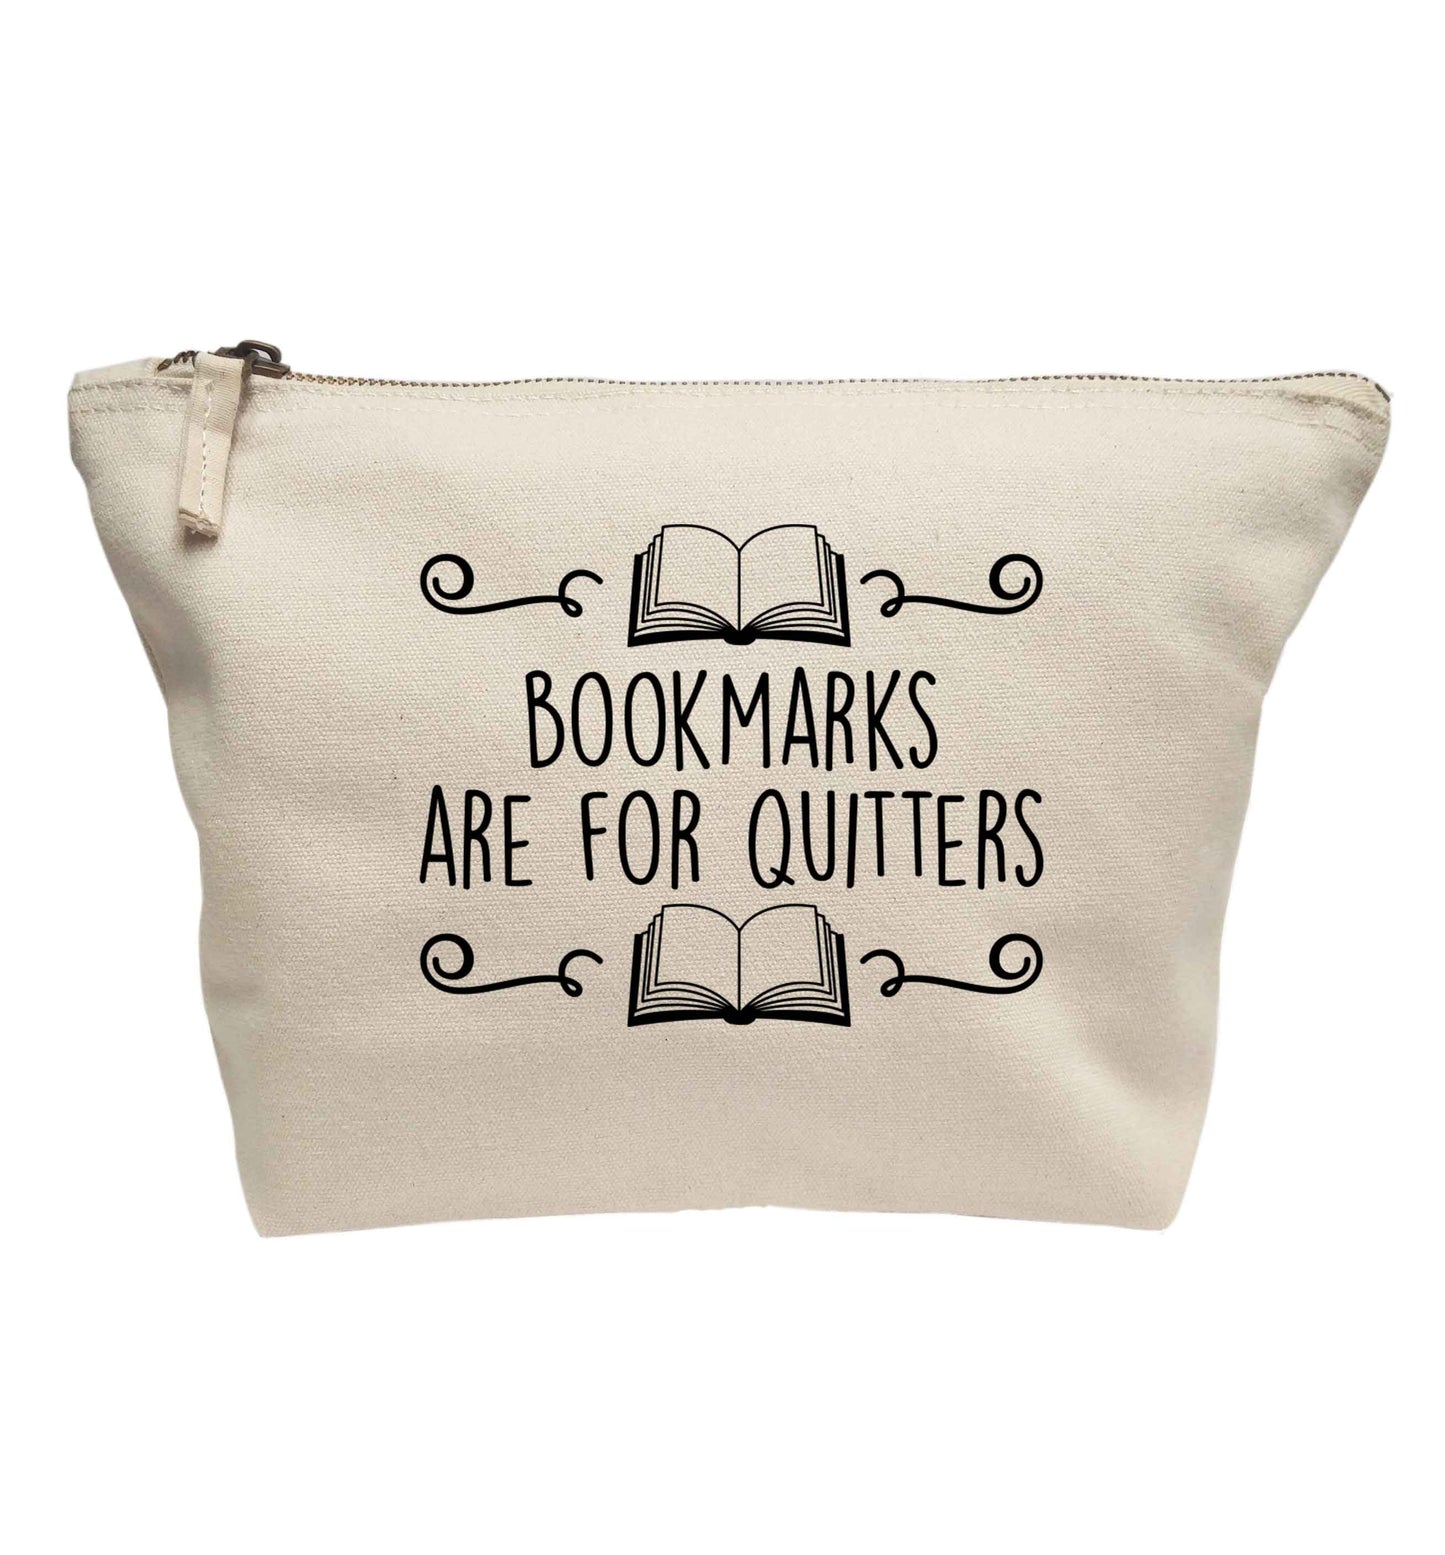 Bookmarks are for quitters | Makeup / wash bag